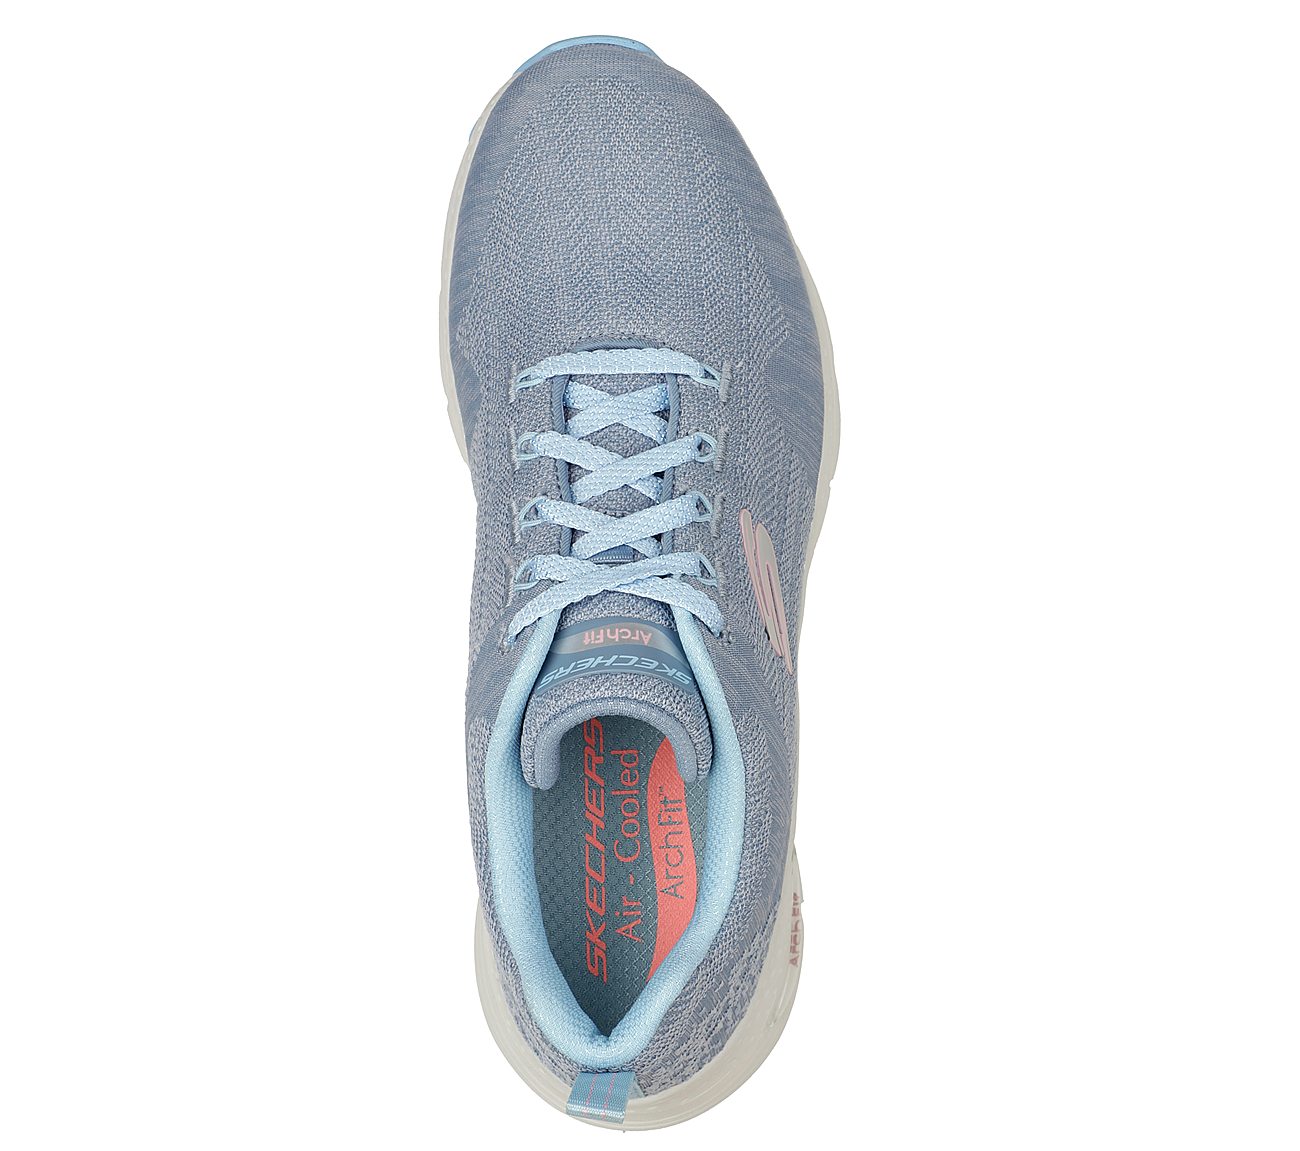 ARCH FIT-COMFY WAVE, SLATE Footwear Top View